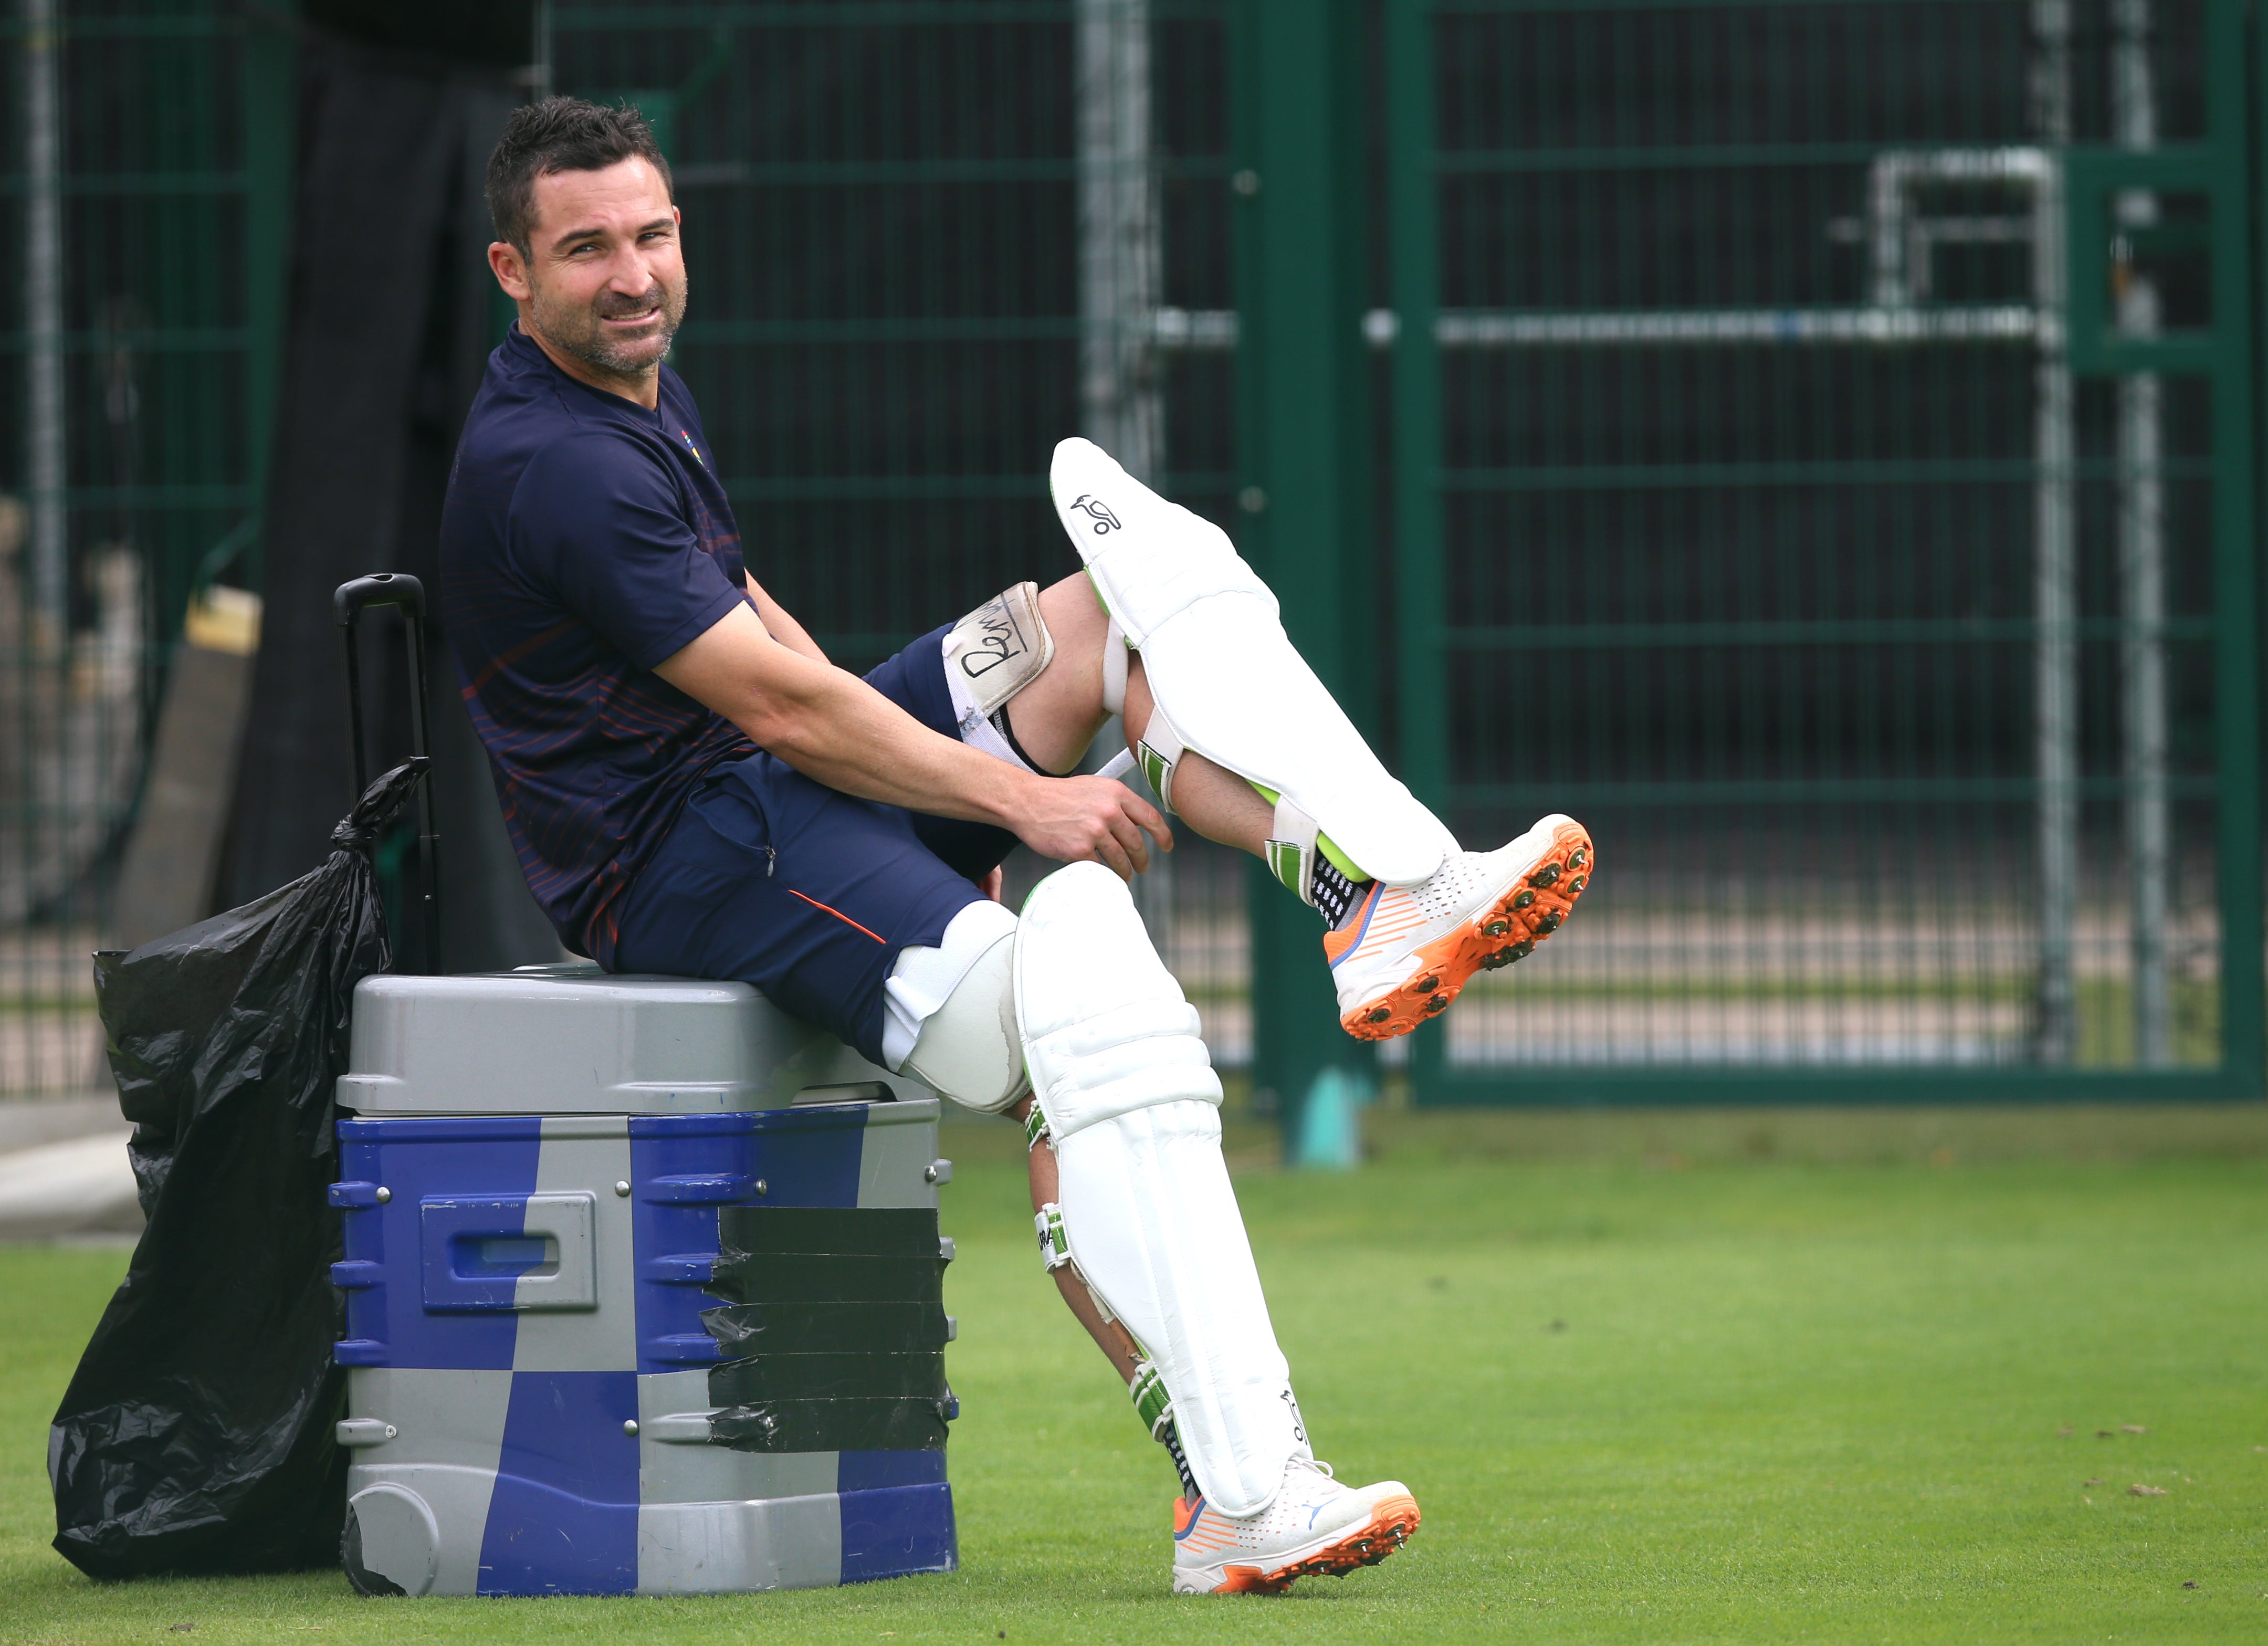 Dean Elgar is expecting a response from England (Nigel French/PA)